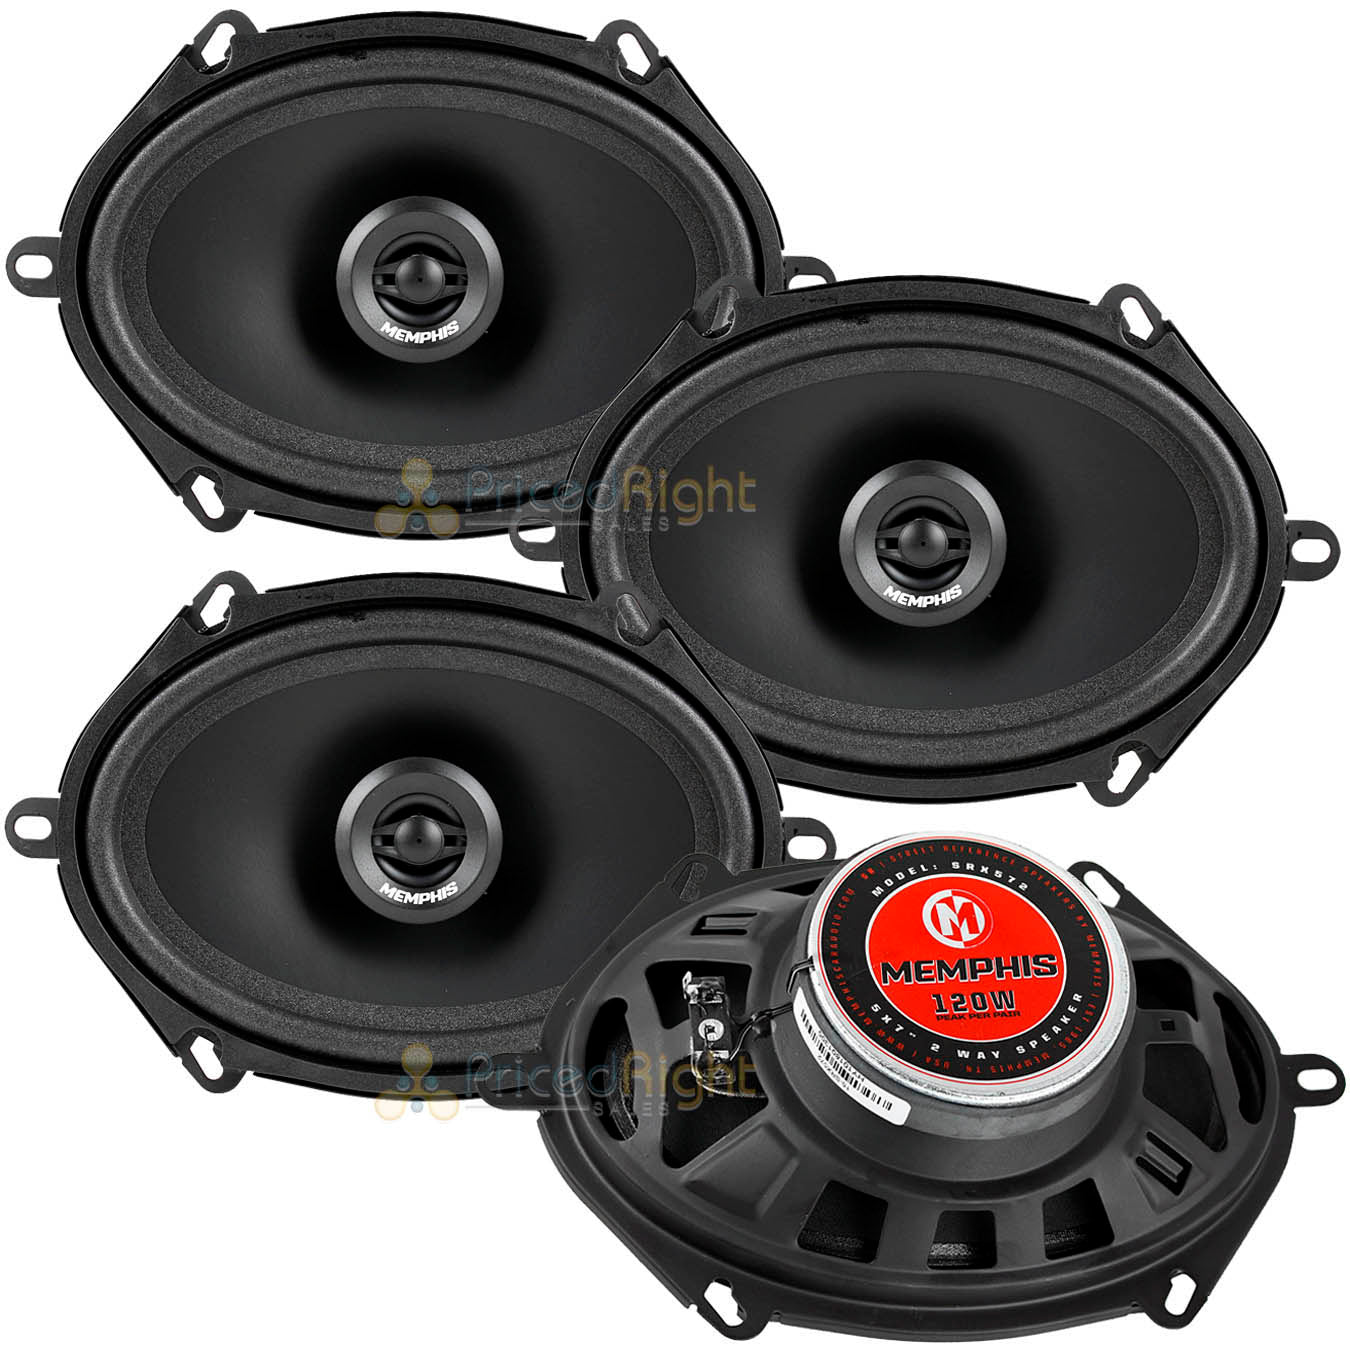 Memphis Audio 5x7" 2Way Coaxial Speakers 120W Max Street Reference Series 2 Pair